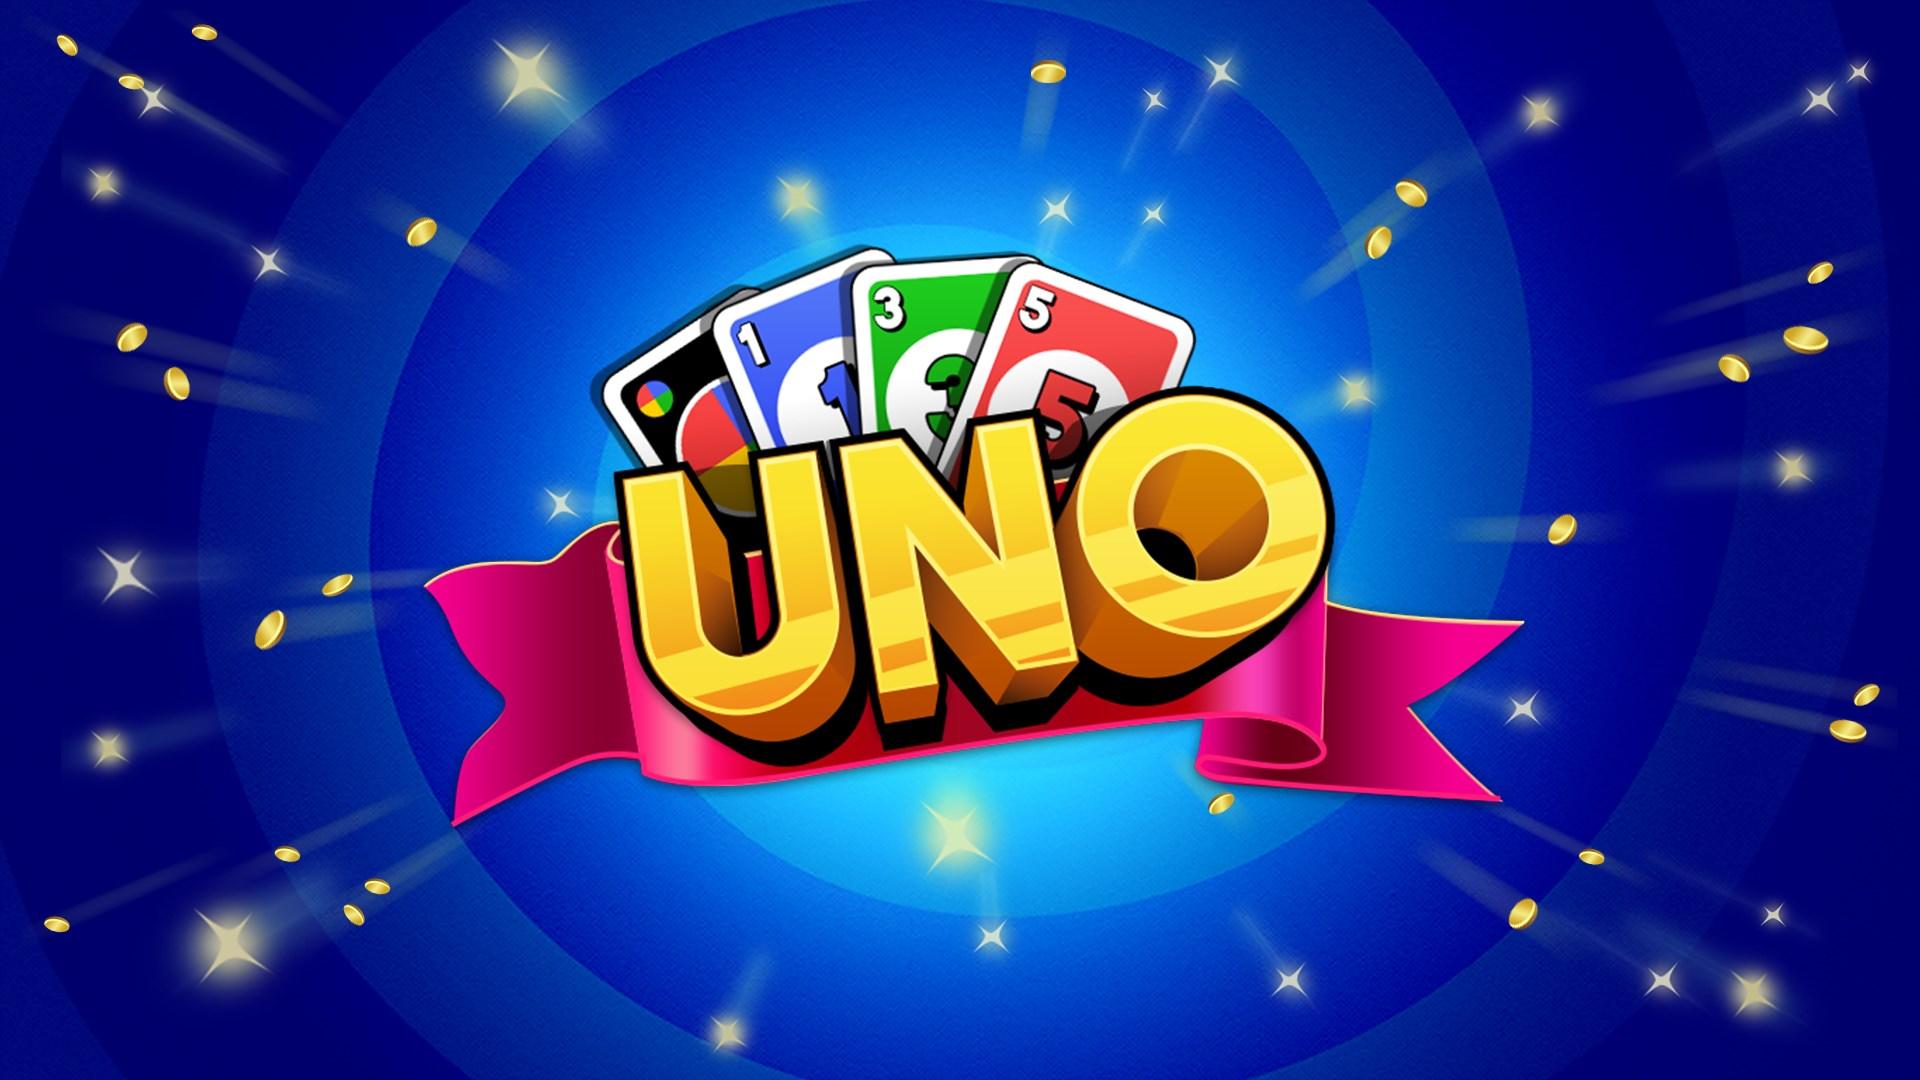 Uno reverse cards HD wallpapers